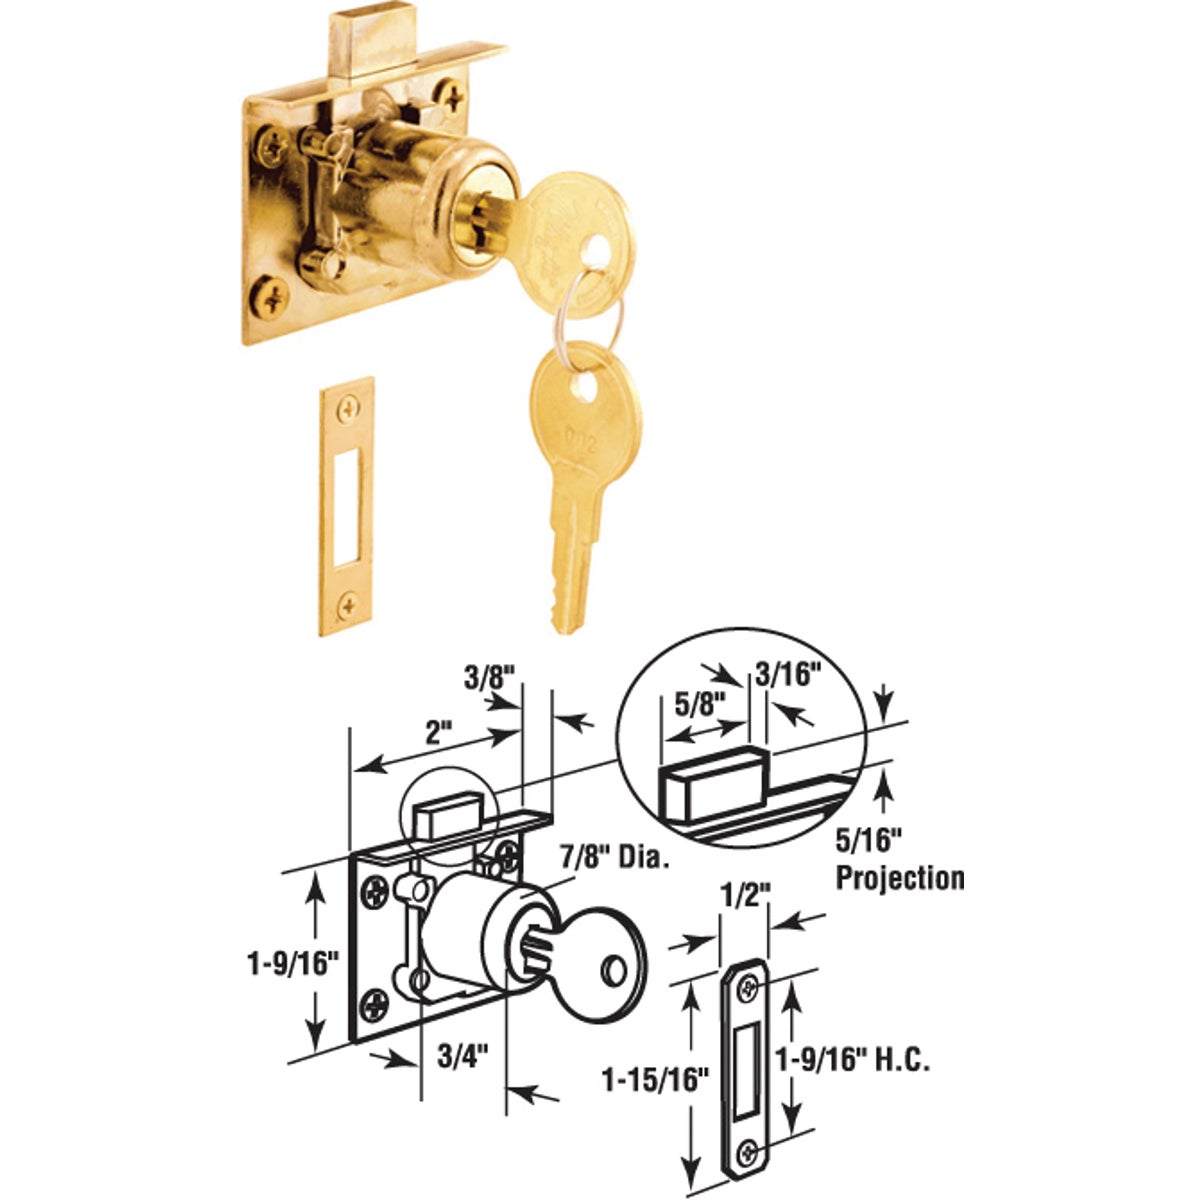 Item 233697, Drawer and cabinet lock with keeper; brass plated finish, fits up to a 7/8 